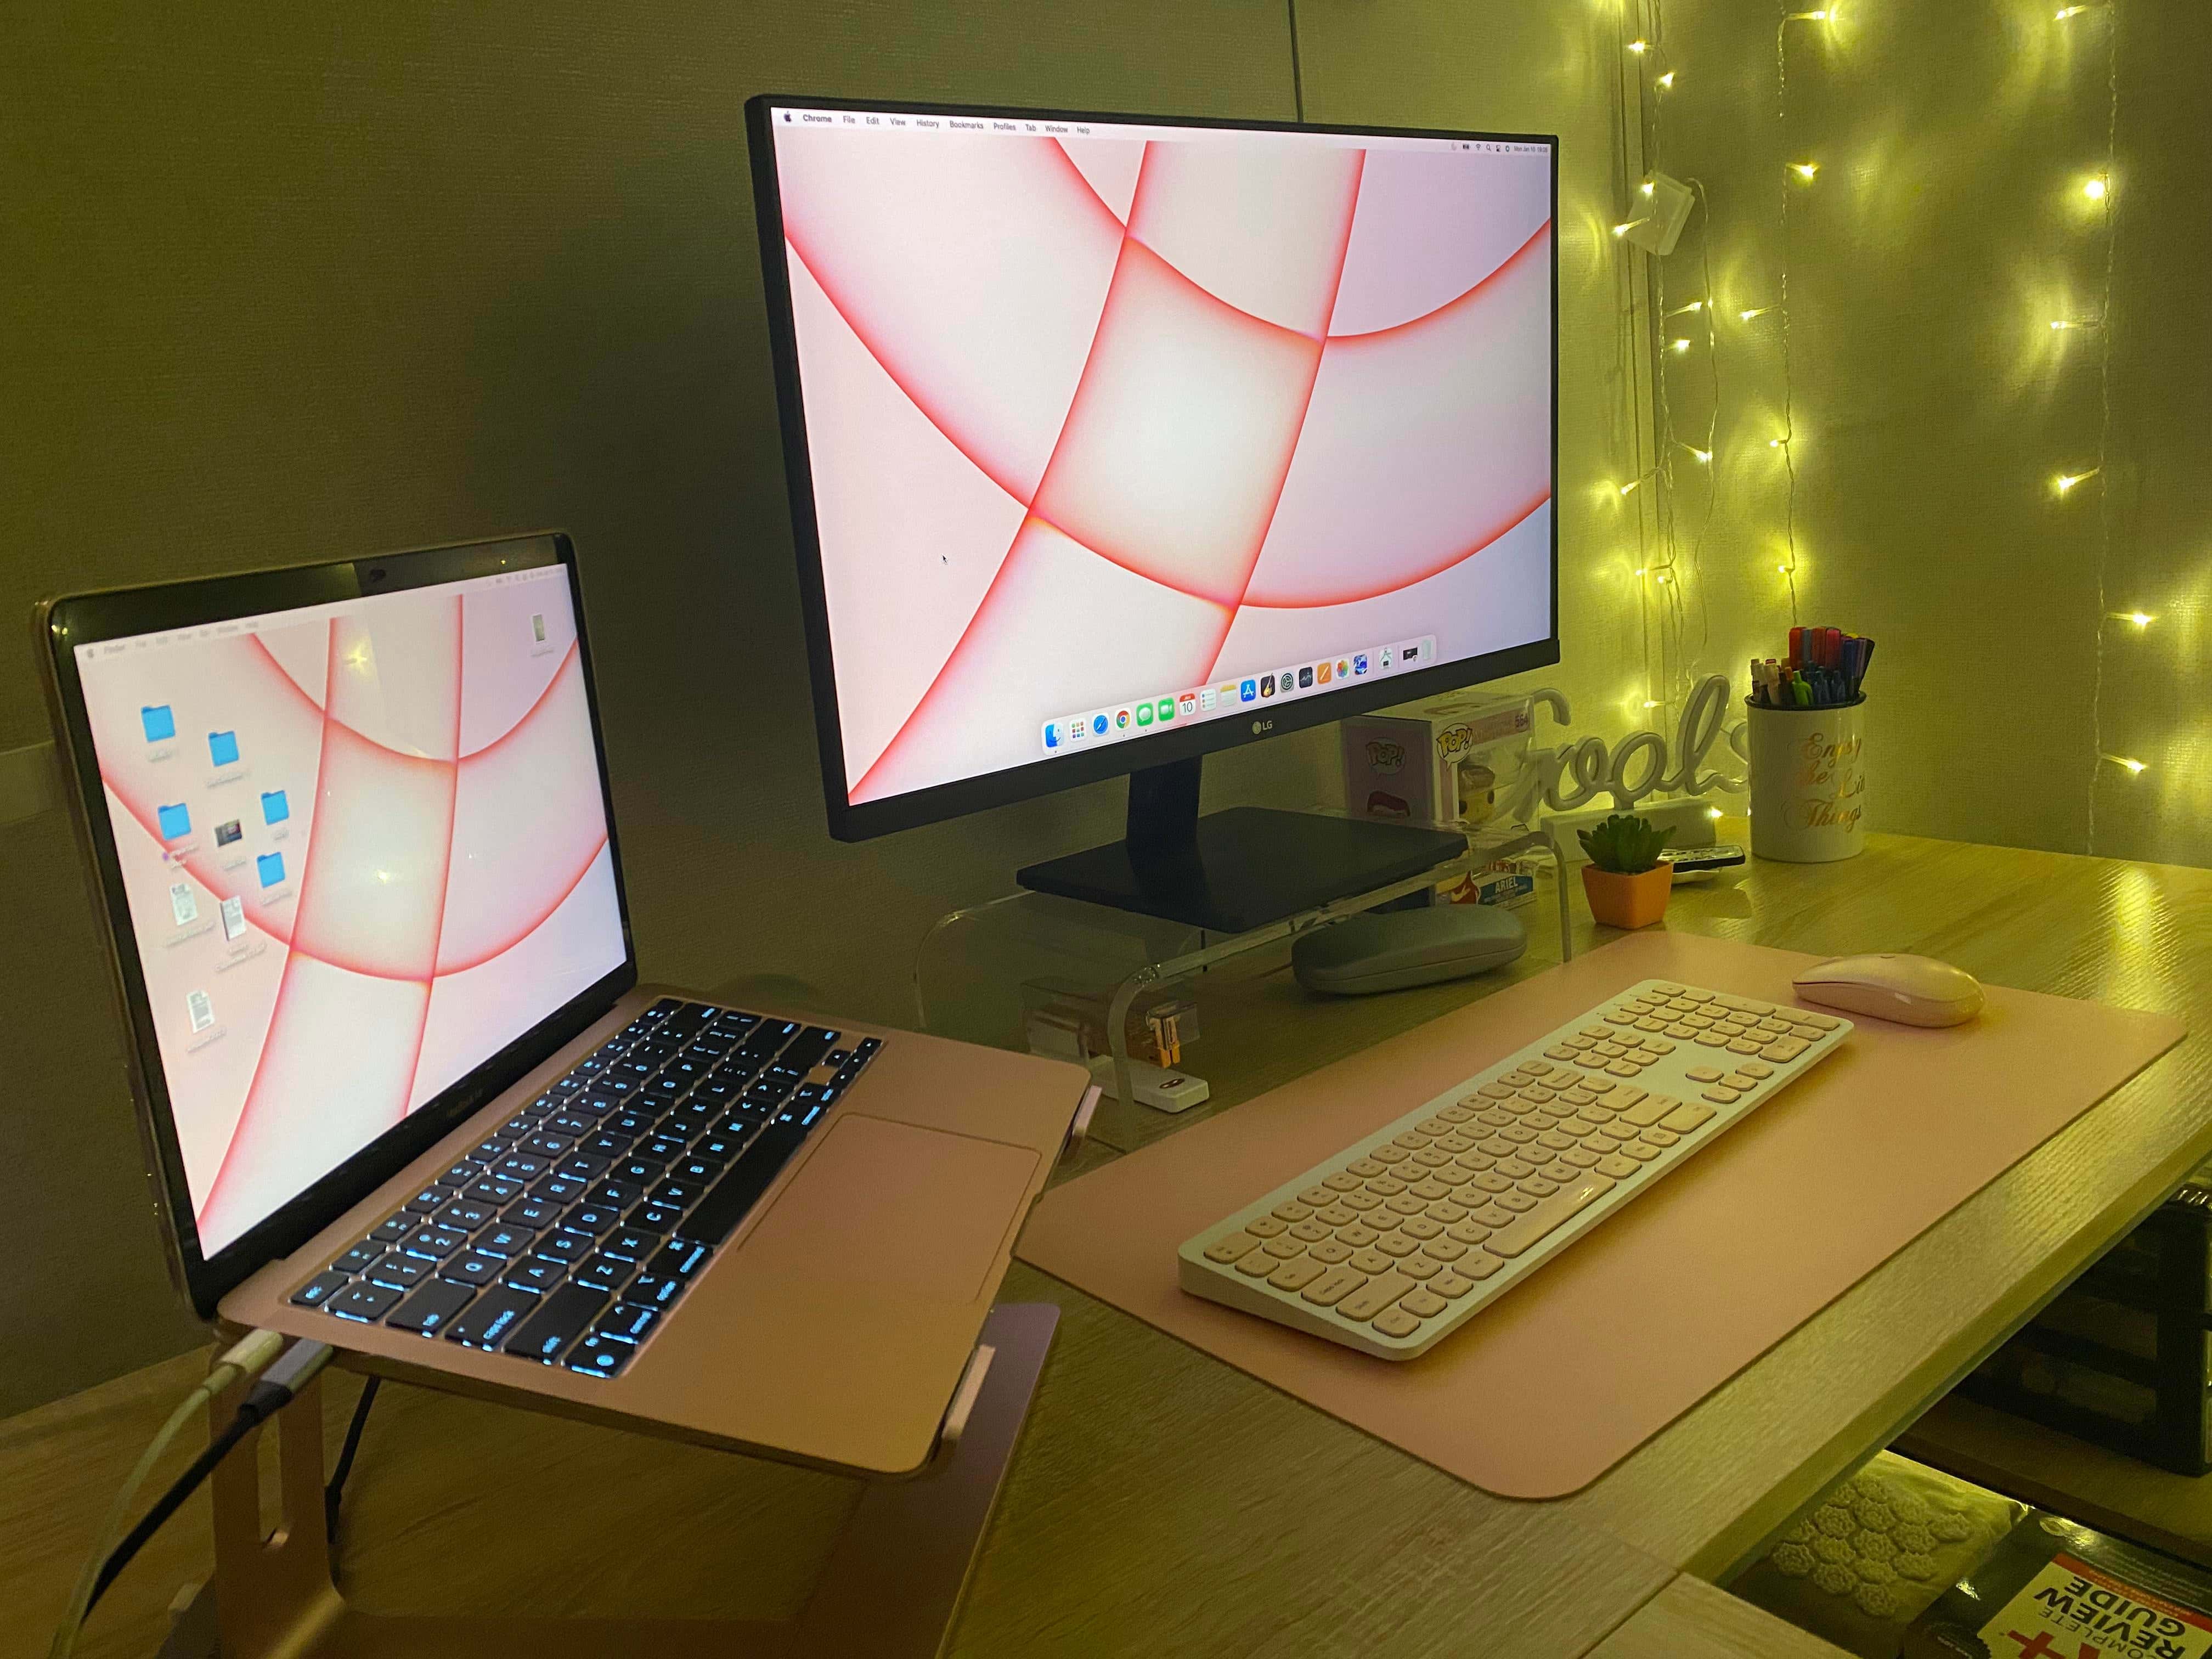 Finances-friendly MacBook Air workstation will get it finished with aptitude [Setups]